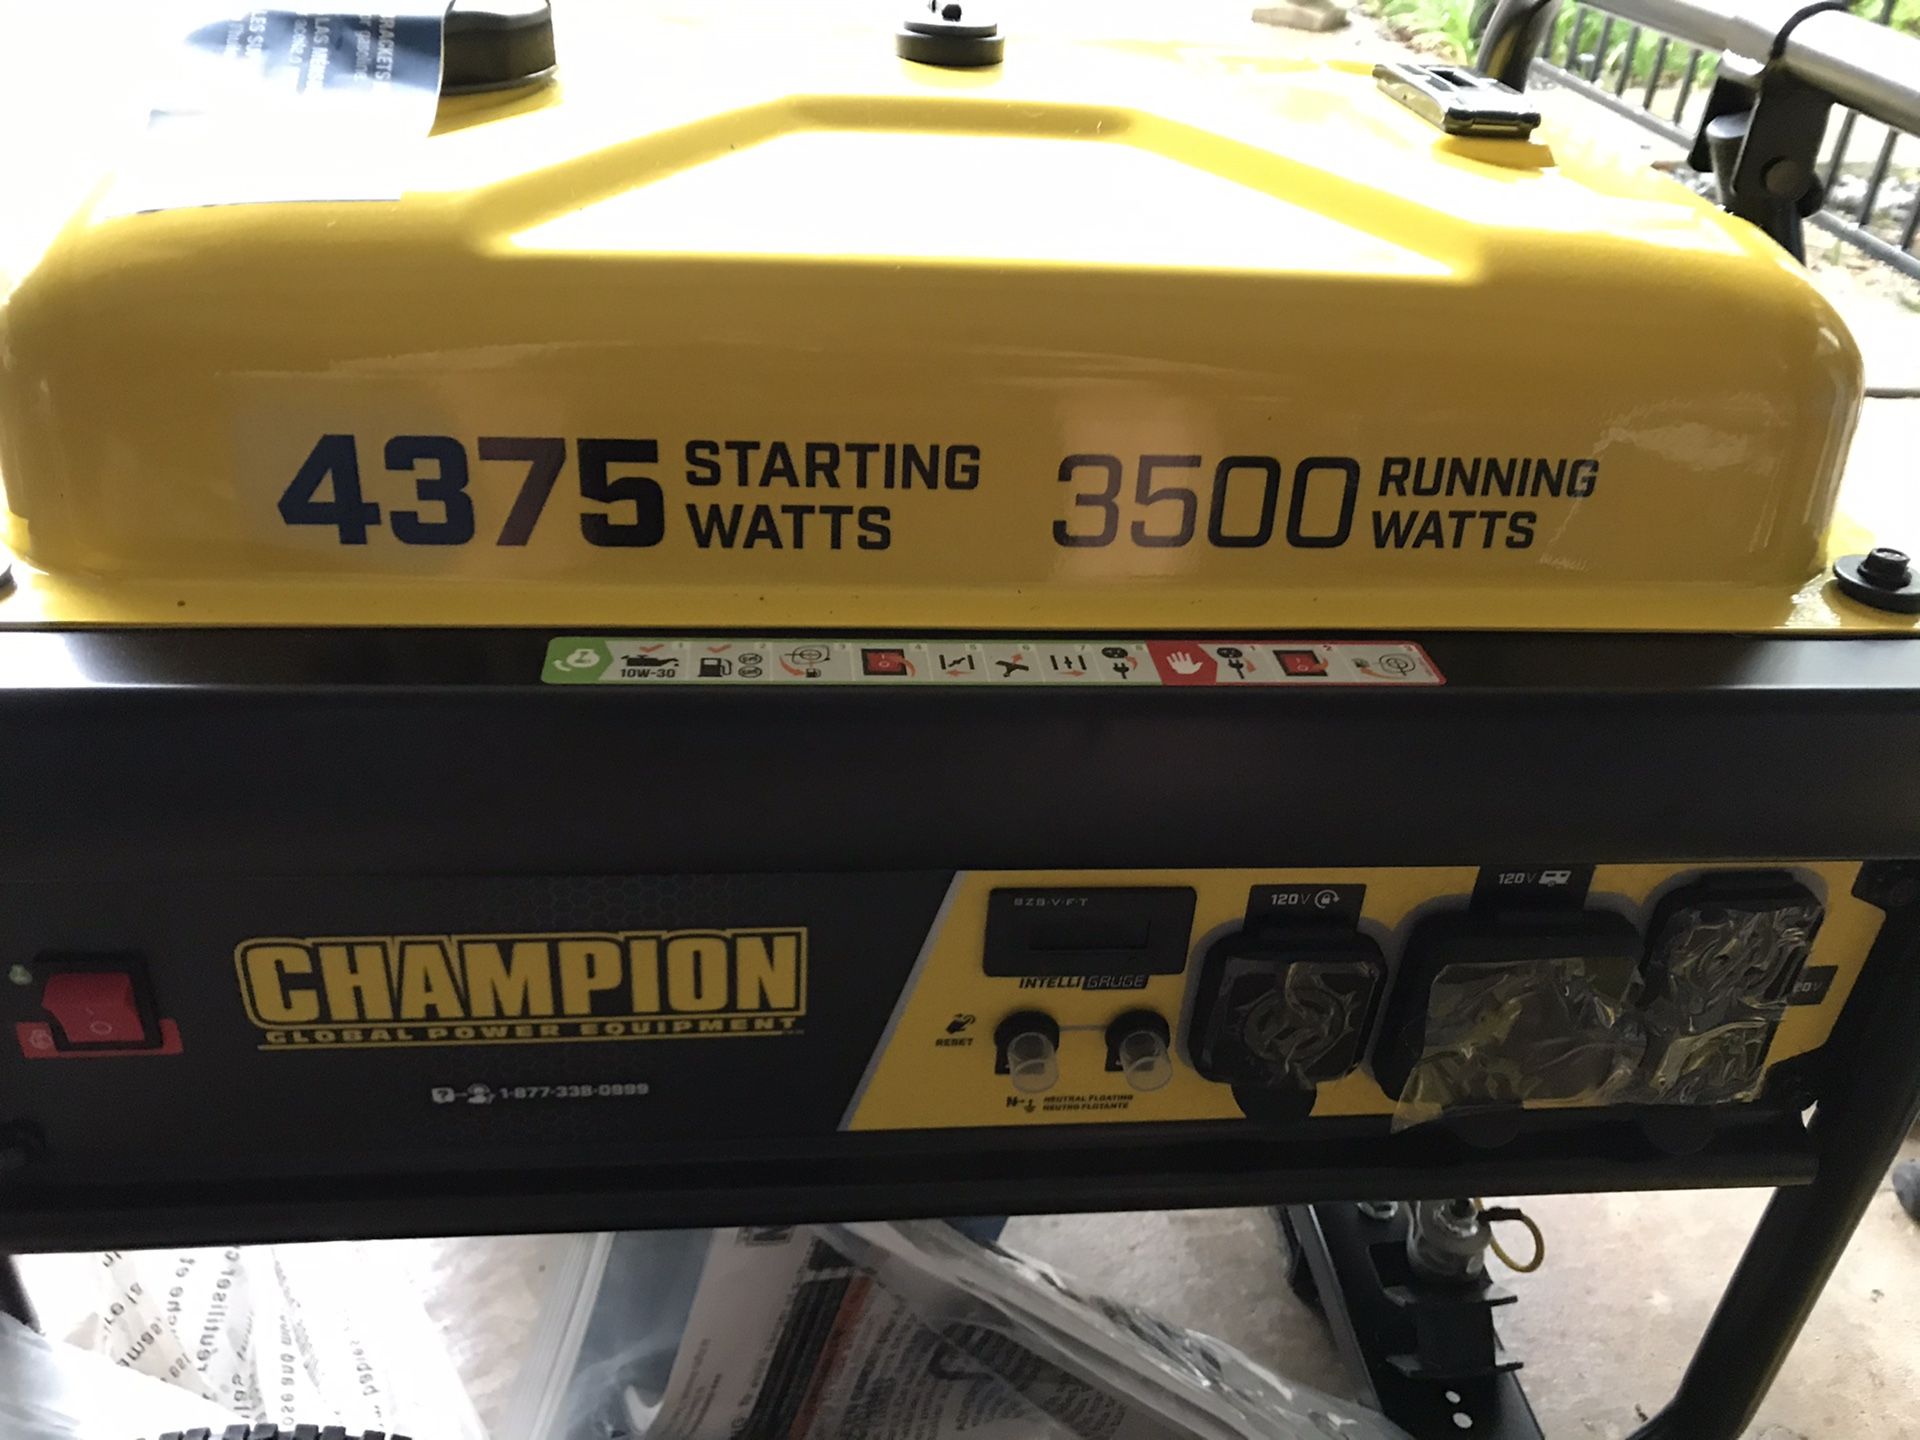 Champion generator, never used . Still wrapped